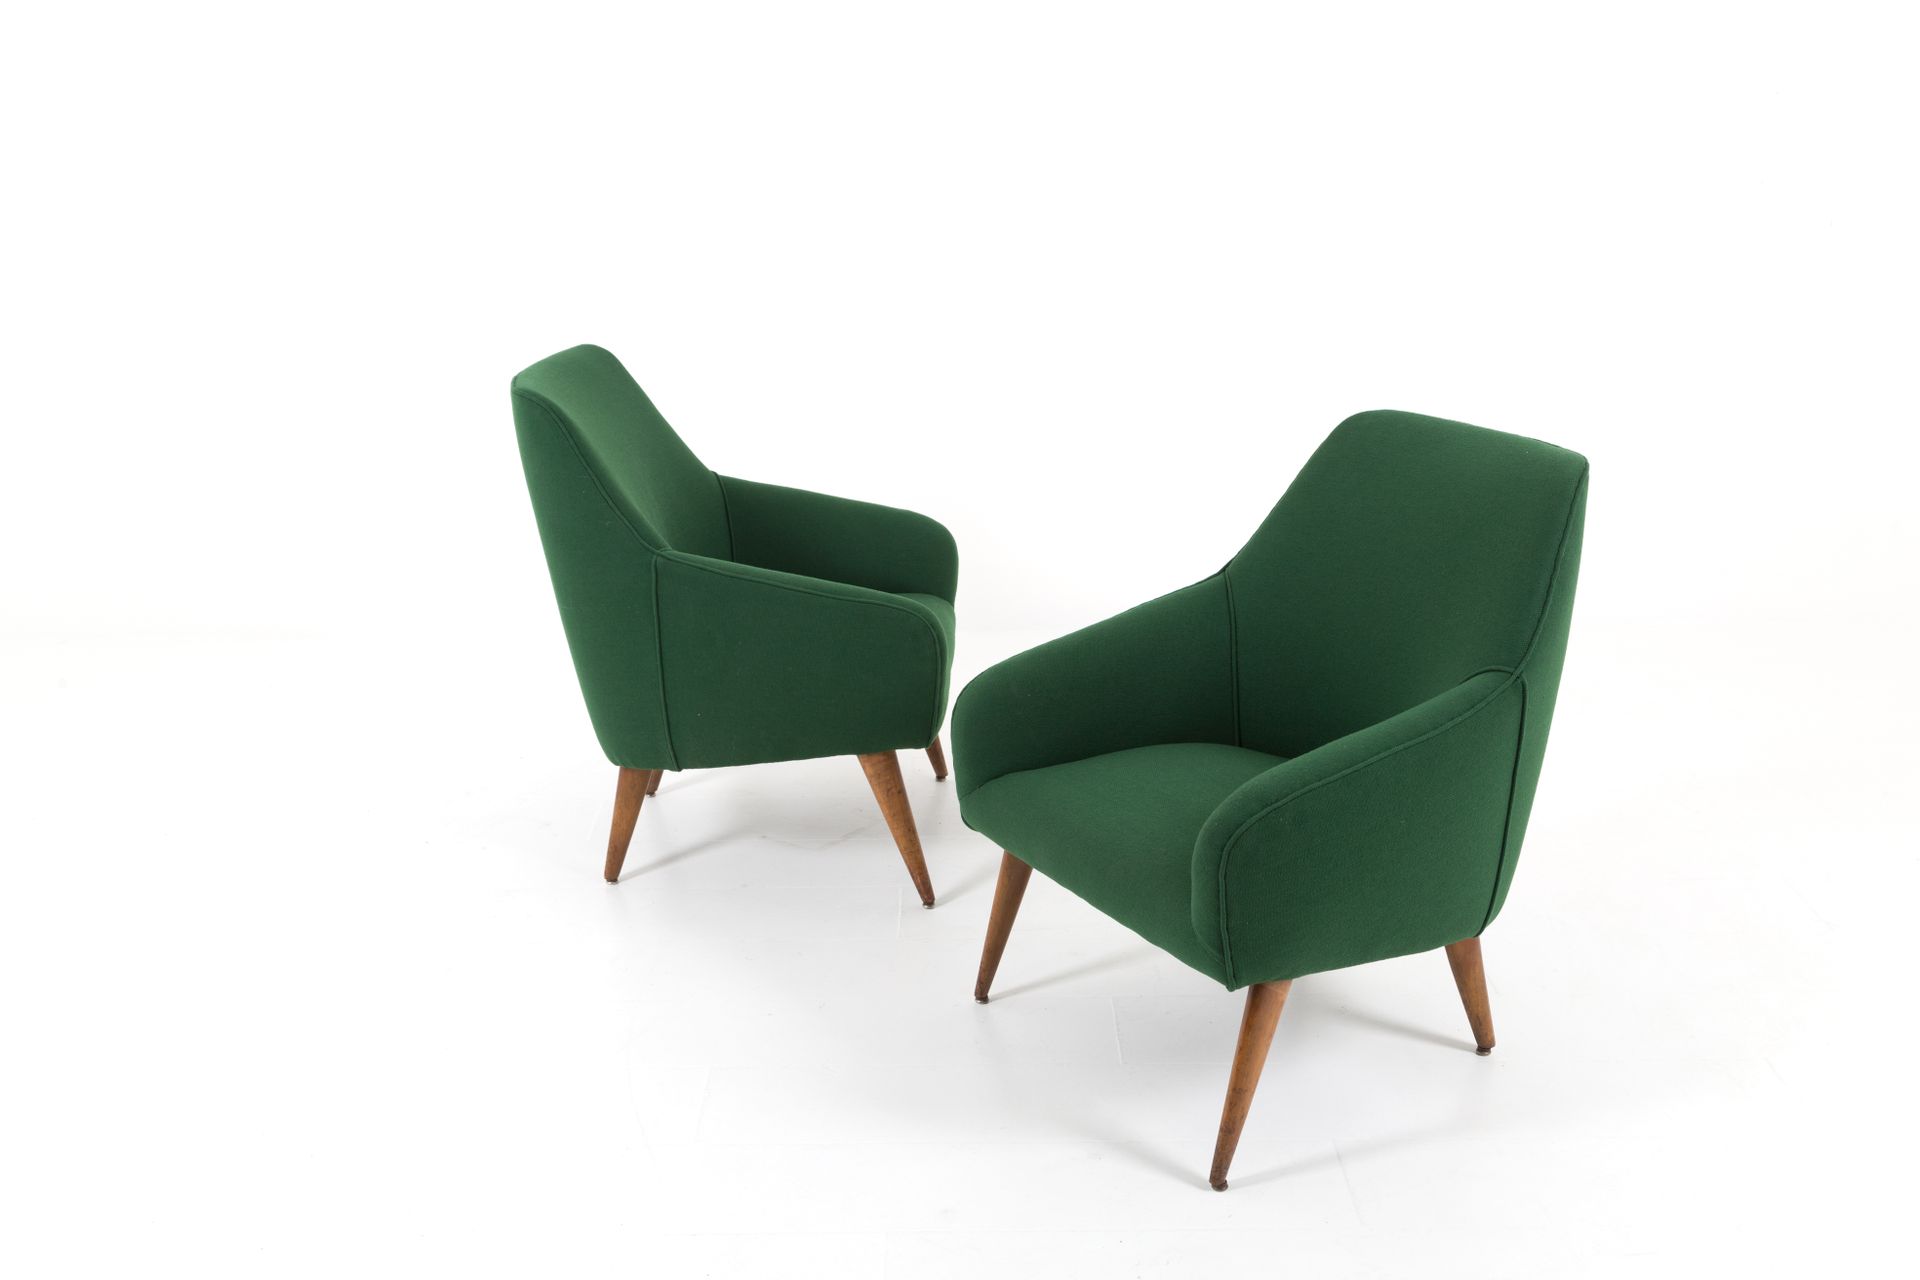 GIO PONTI for CASSINA. Pair of wooden armchairs GIO PONTI (Milan, 1891-1979) for&hellip;